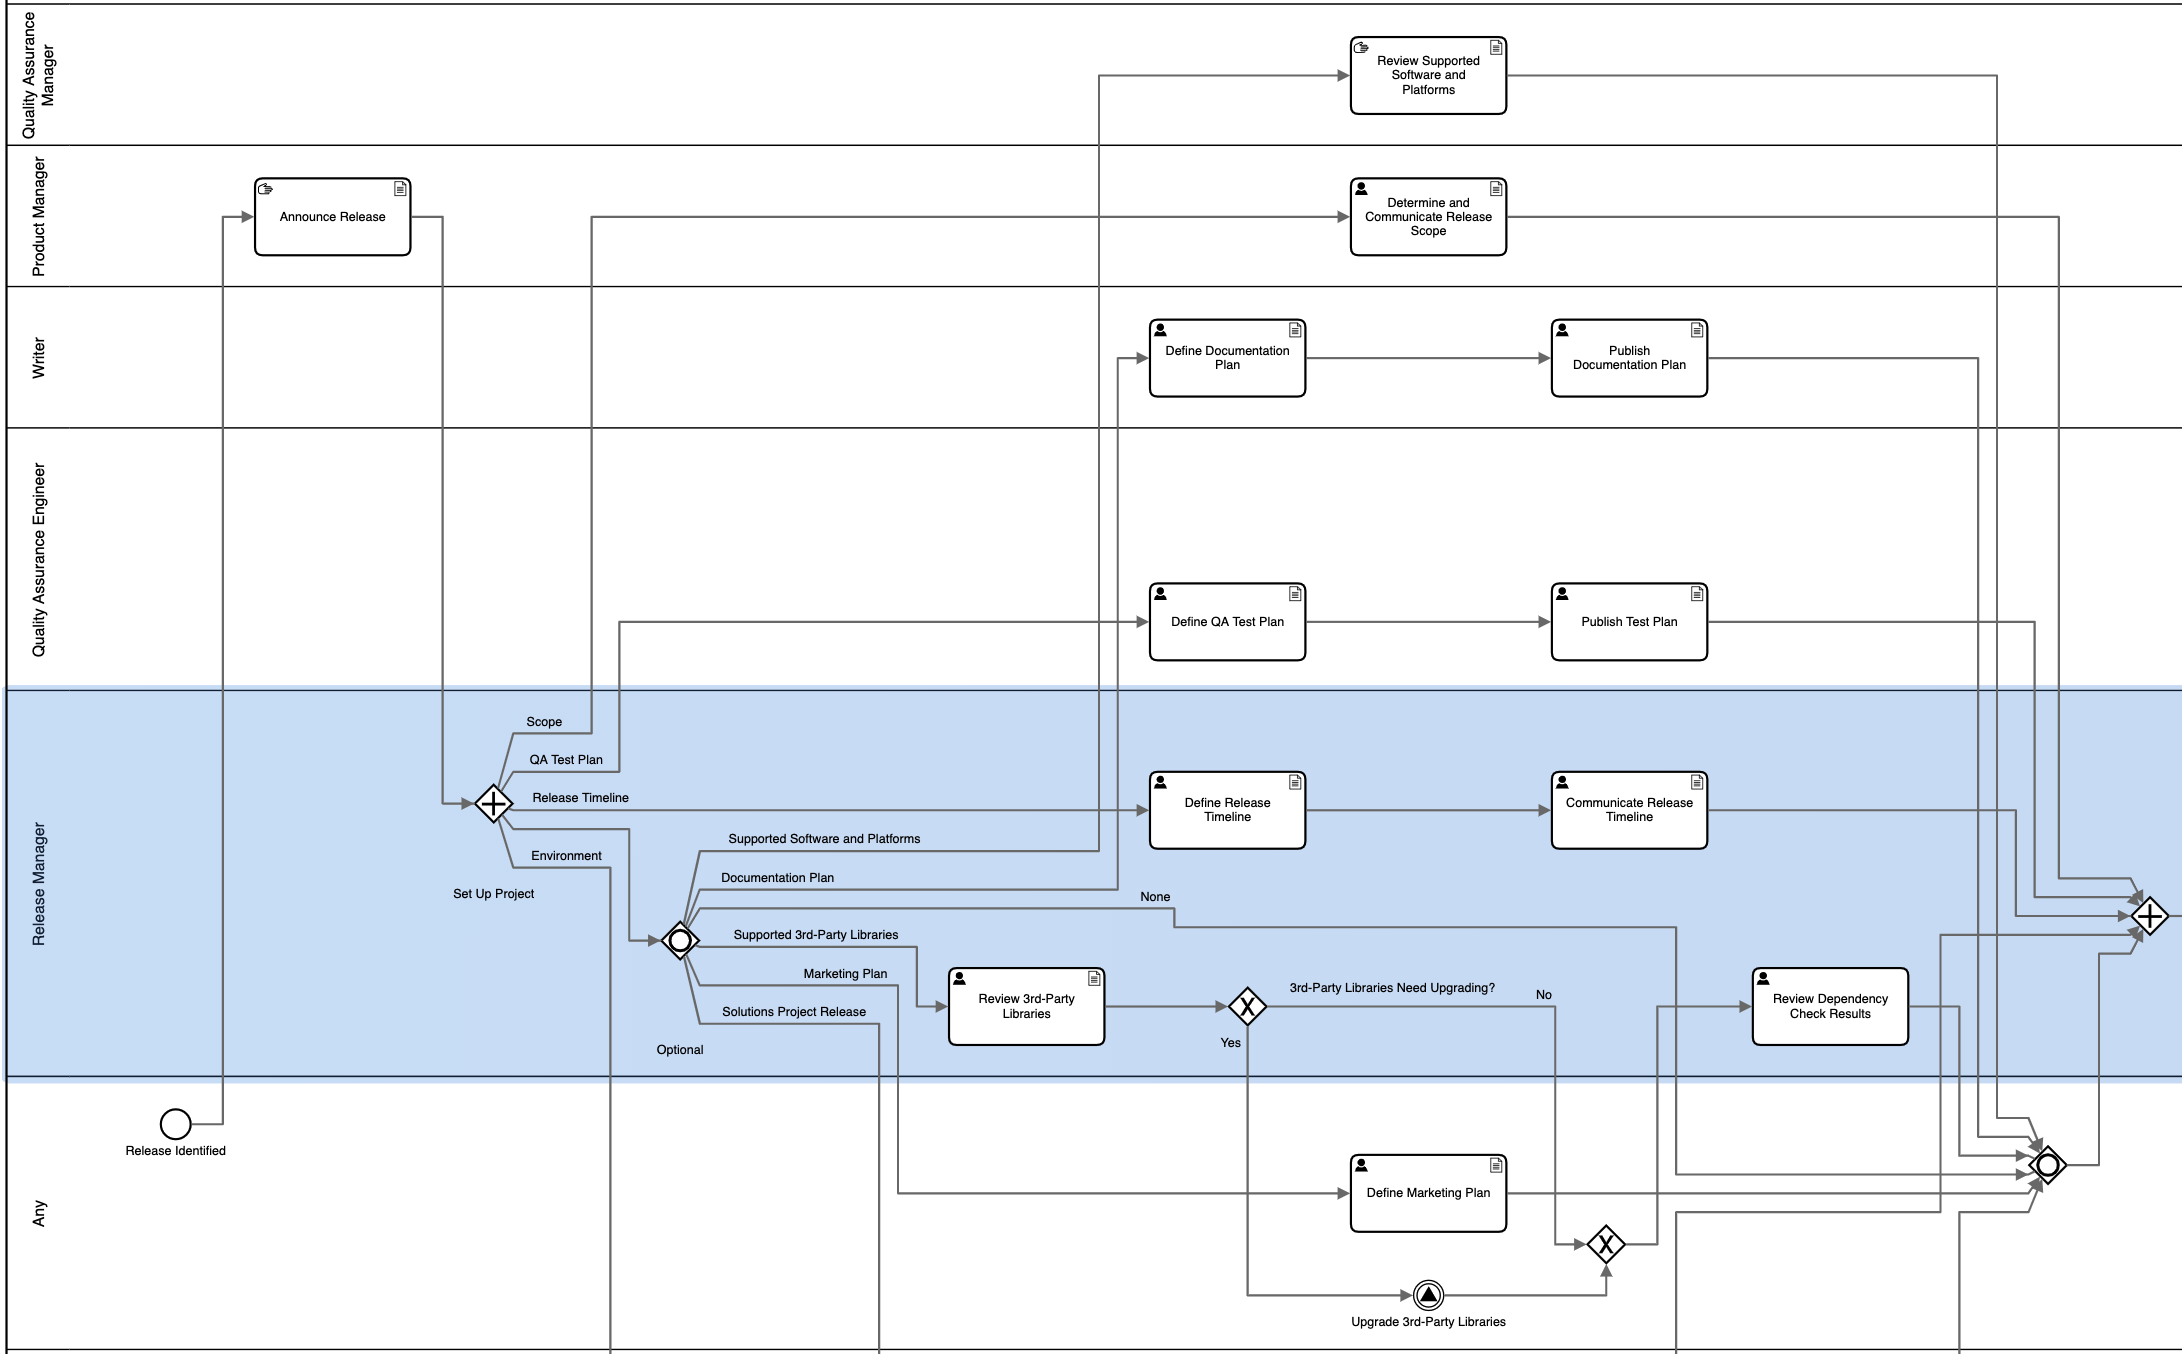 Automatically apply swimlanes to processes in the Business Process Modeling module